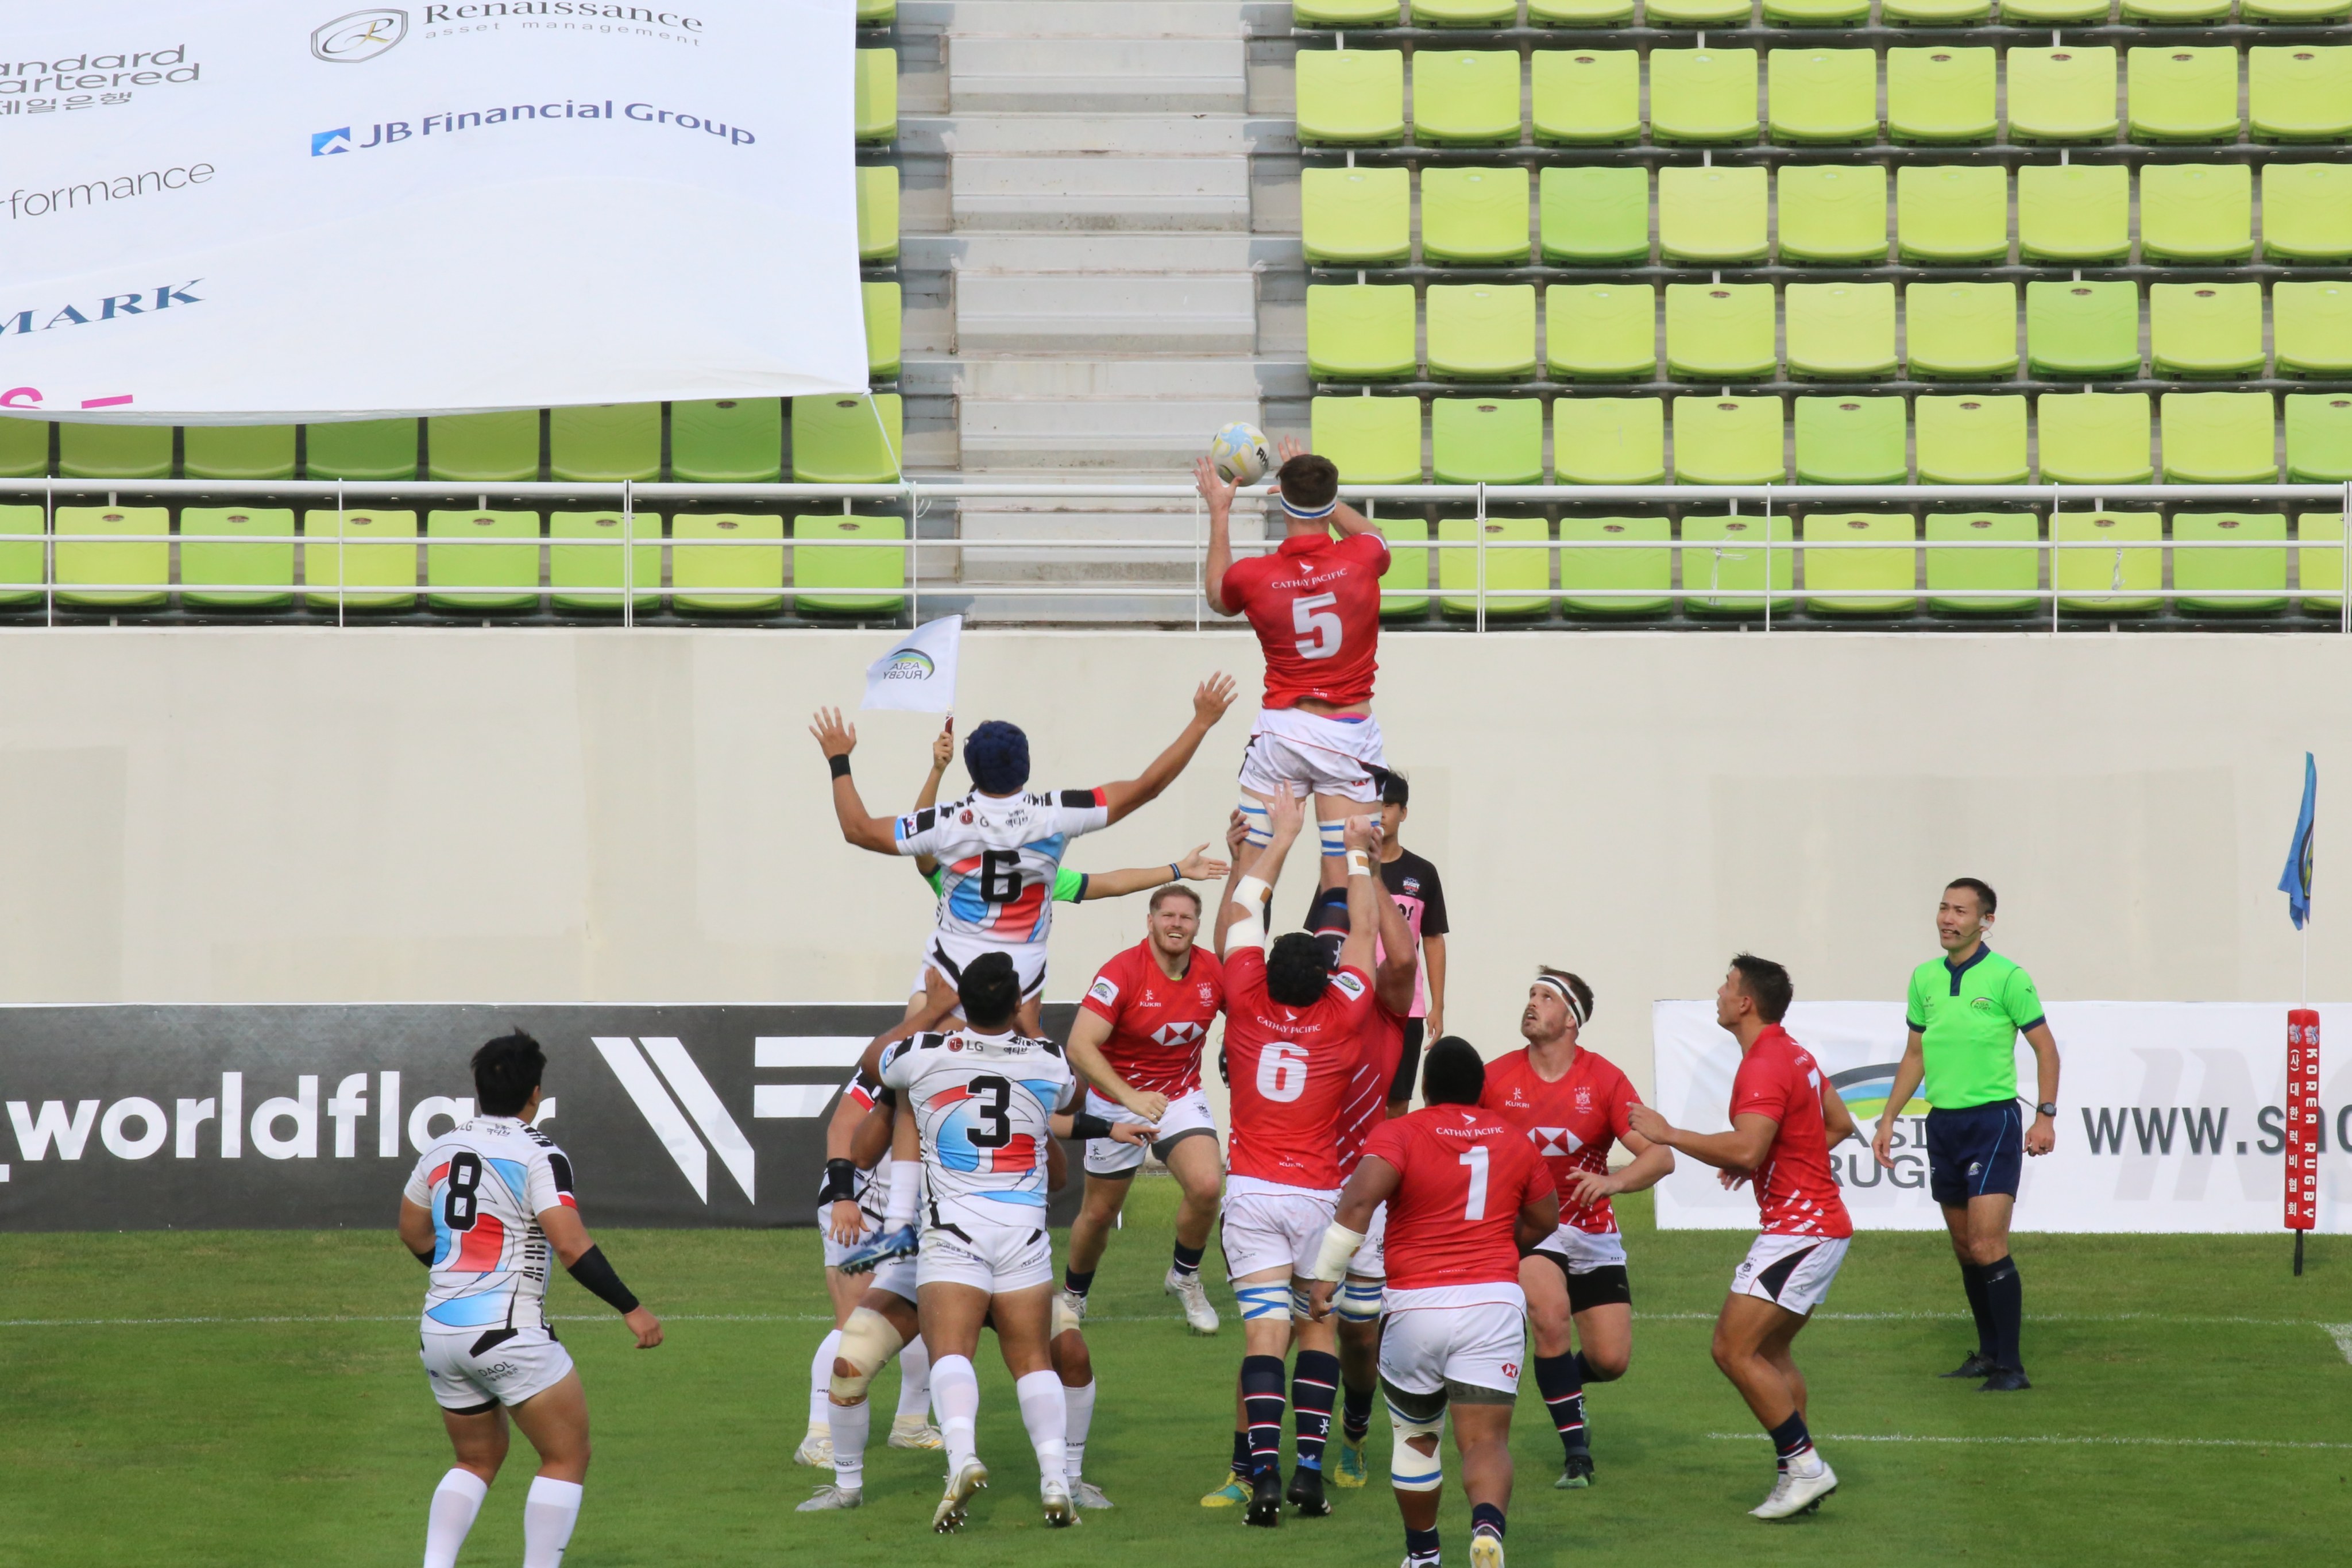 Hong Kong lock Patrick Jenkinson claims the ball during the Asia Rugby Championship match against Korea. Photo: Asia Rugby